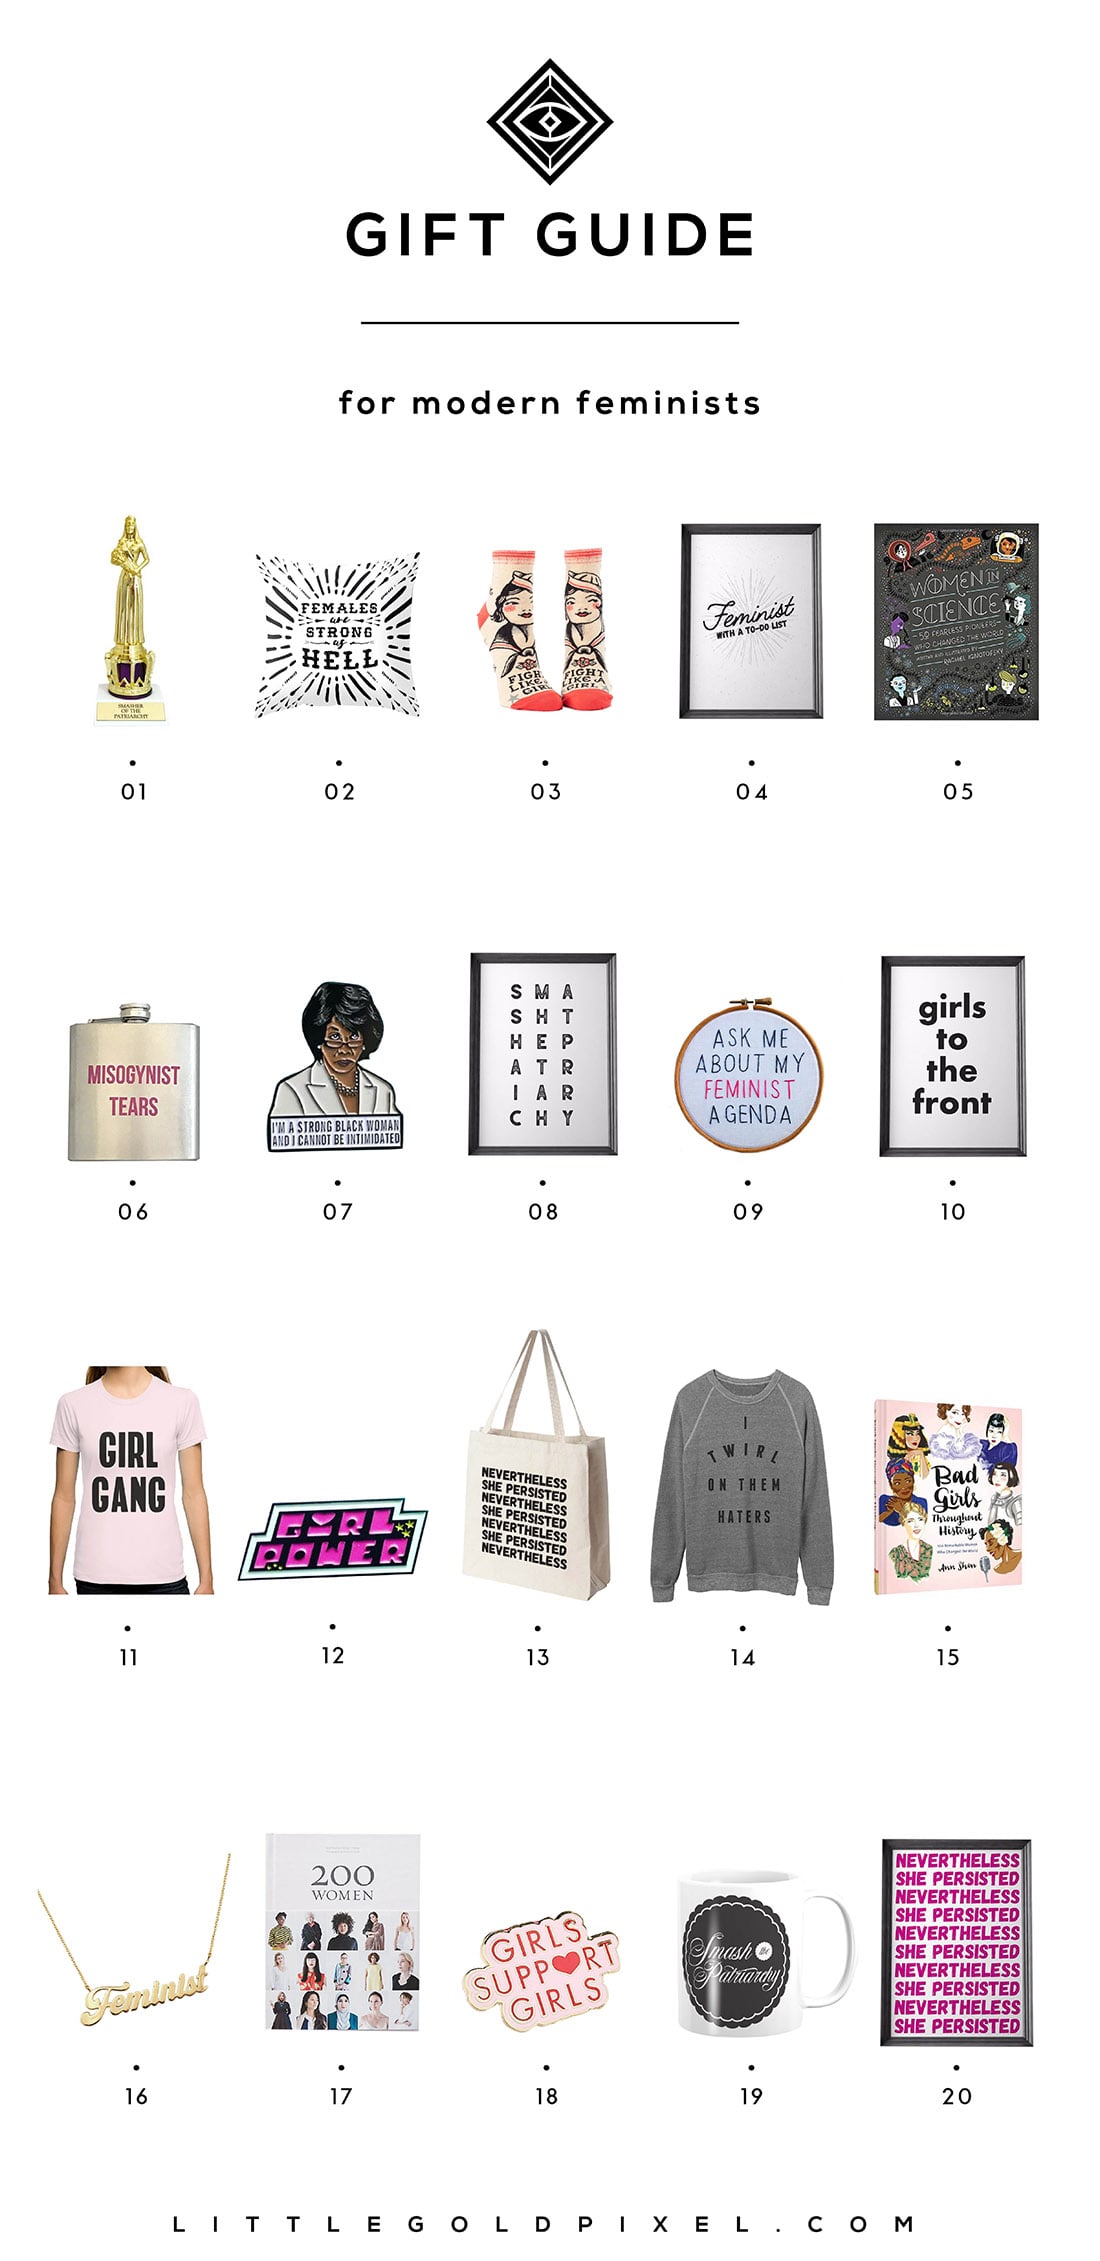 Little Gold Pixel's Feminist Gift Guide: Here are 20 gifts perfect for the strong, modern women in your life. Grab one for yourself while you're at it!